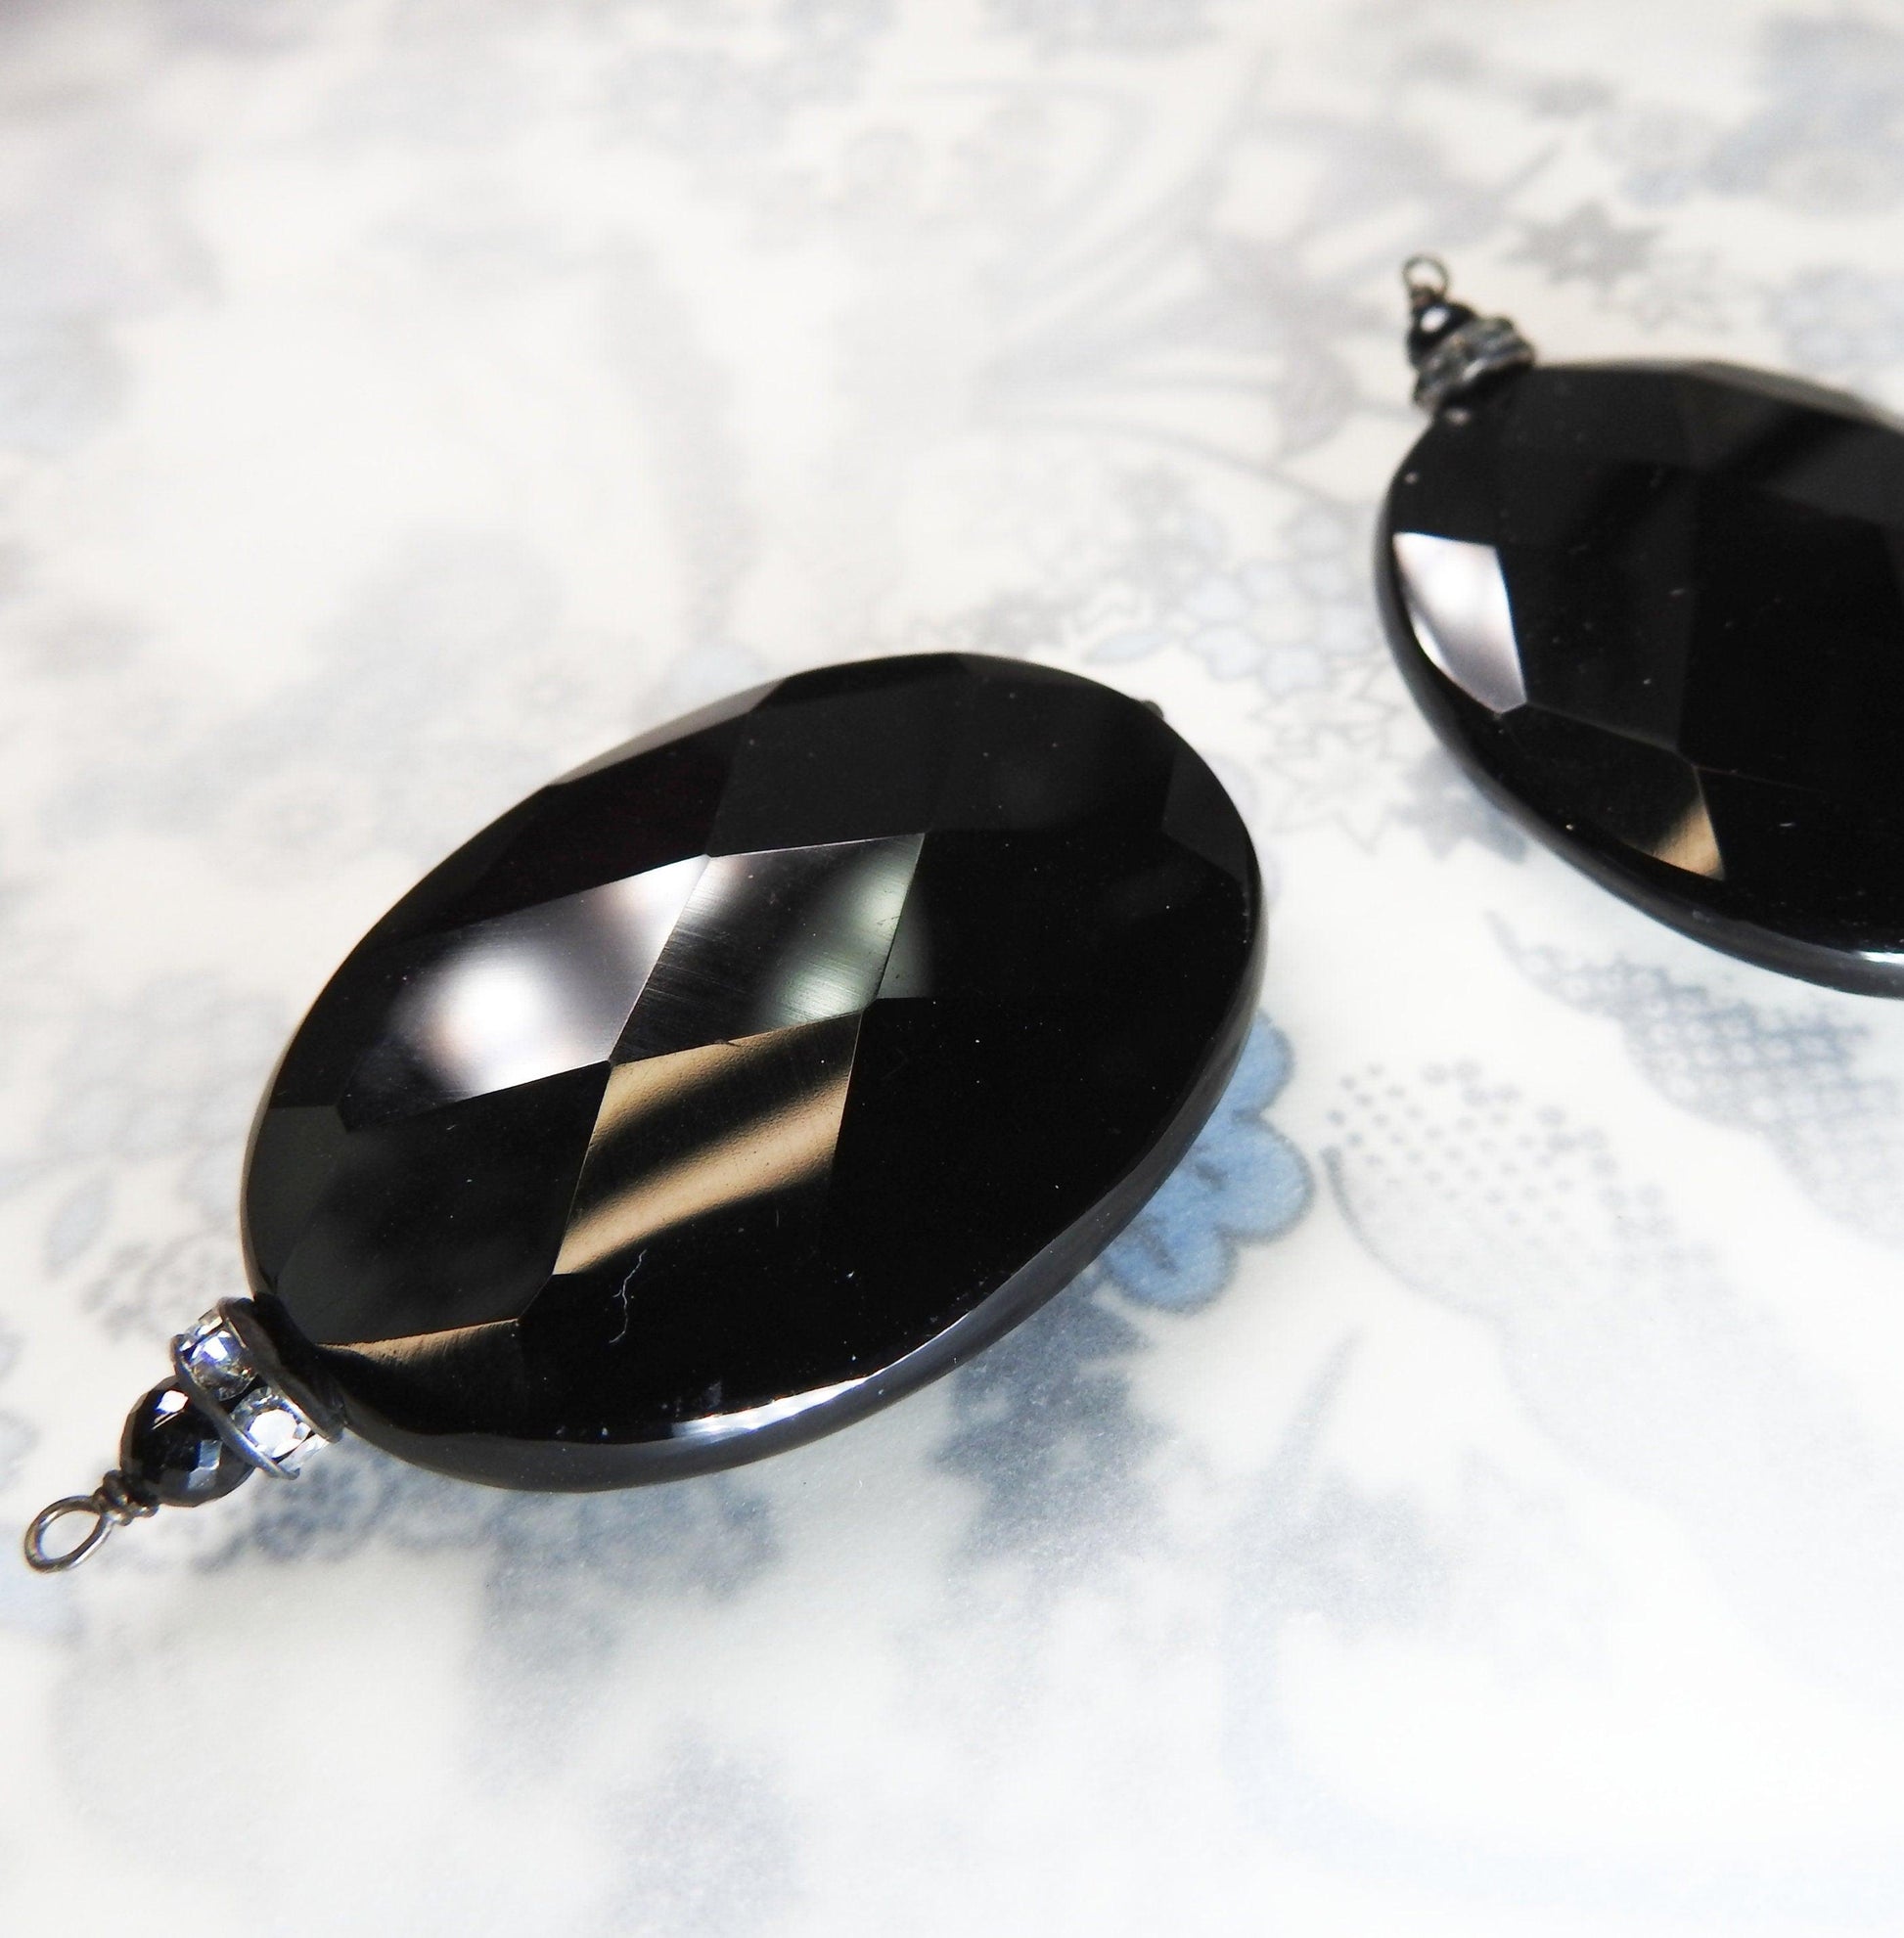 Faceted glass pendants components for making earrings. Jet black chandelier or vintage pendulous oval shaped focal teardrop adornment